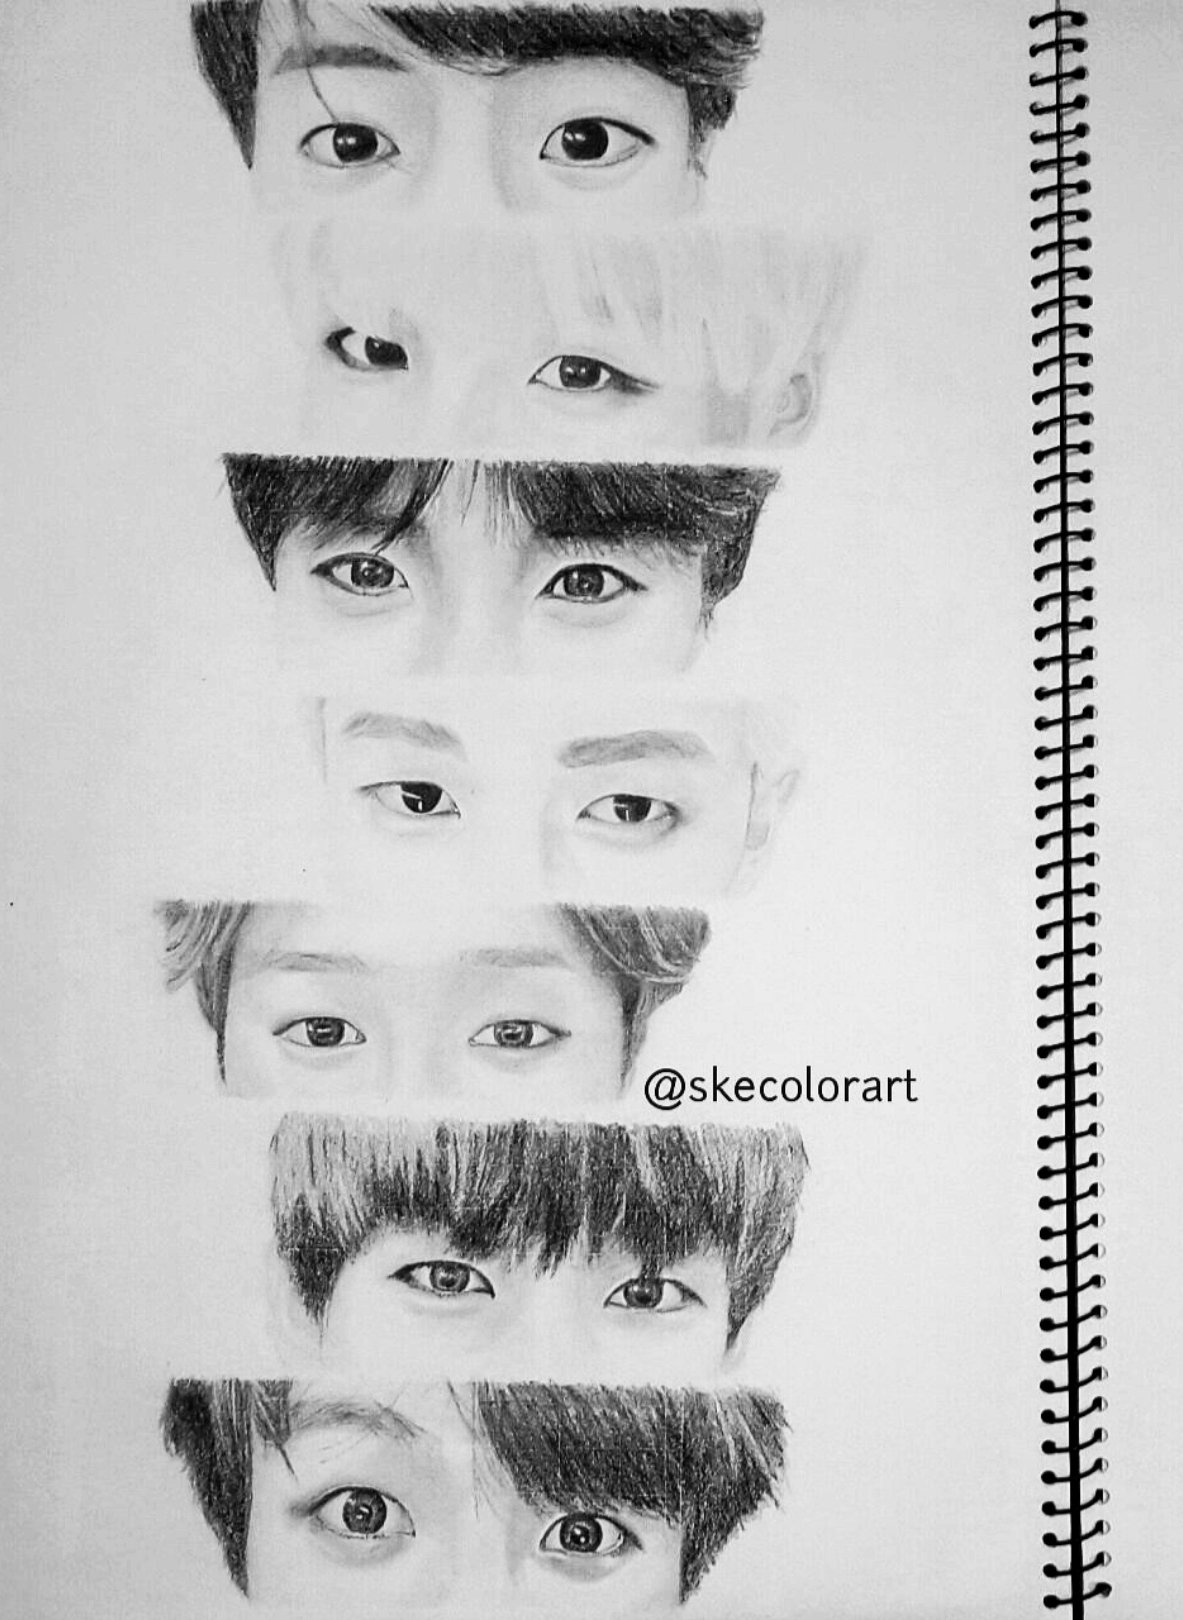 Experimented with charcoal on this drawing of BTS member Jungkook  r drawing